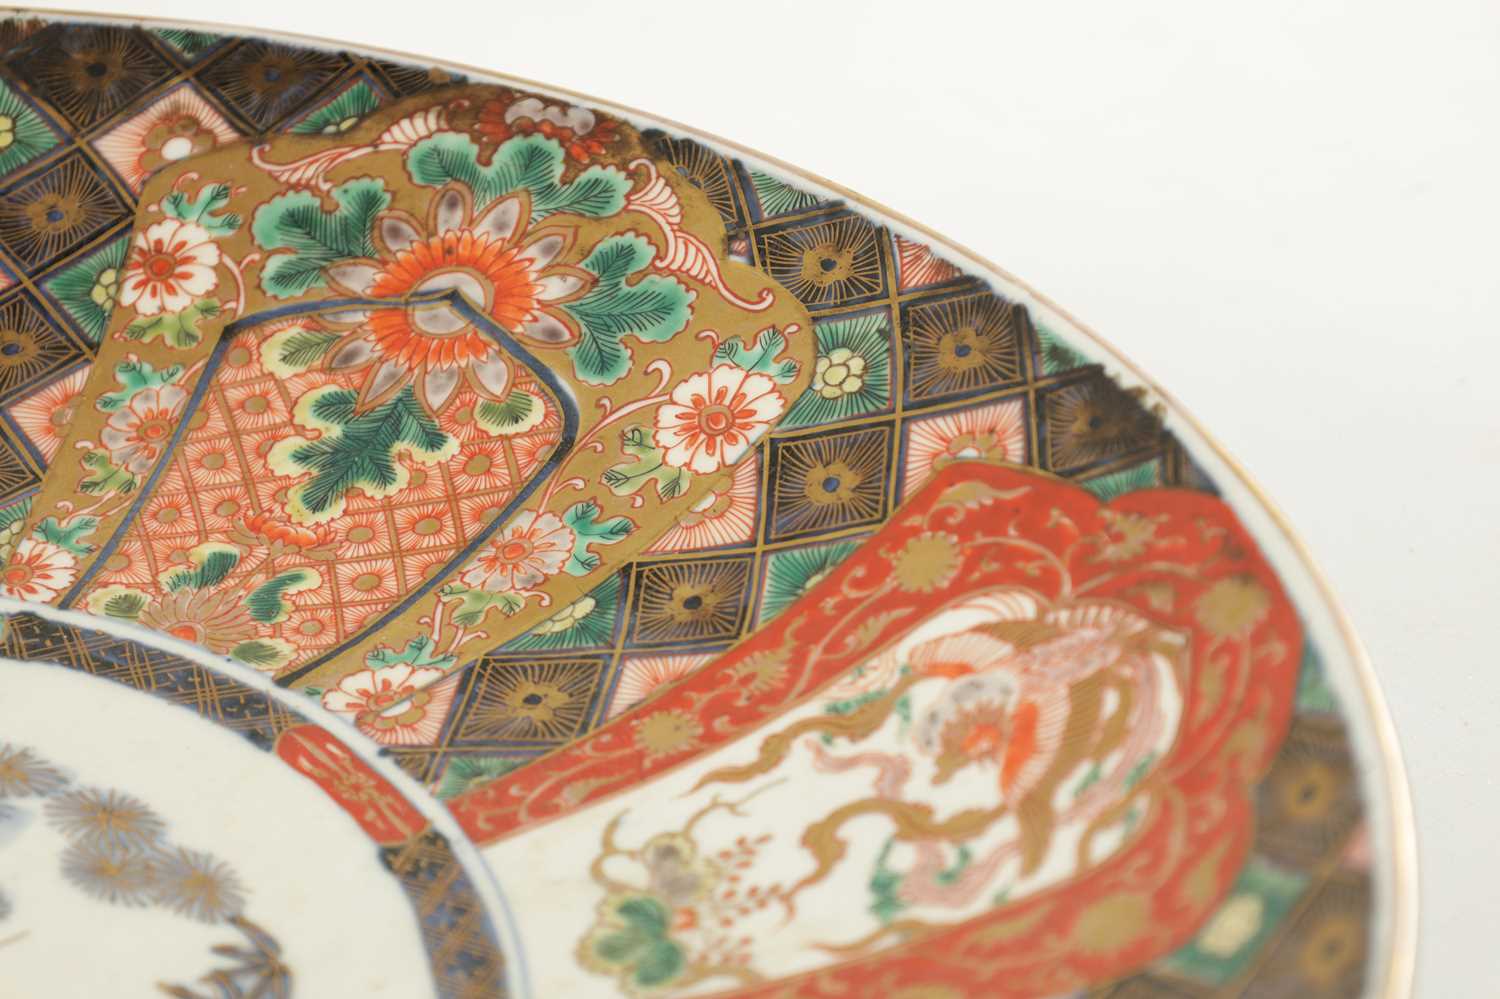 A PAIR OF 19TH CENTURY JAPANESE IMARI CHARGERS - Image 3 of 9